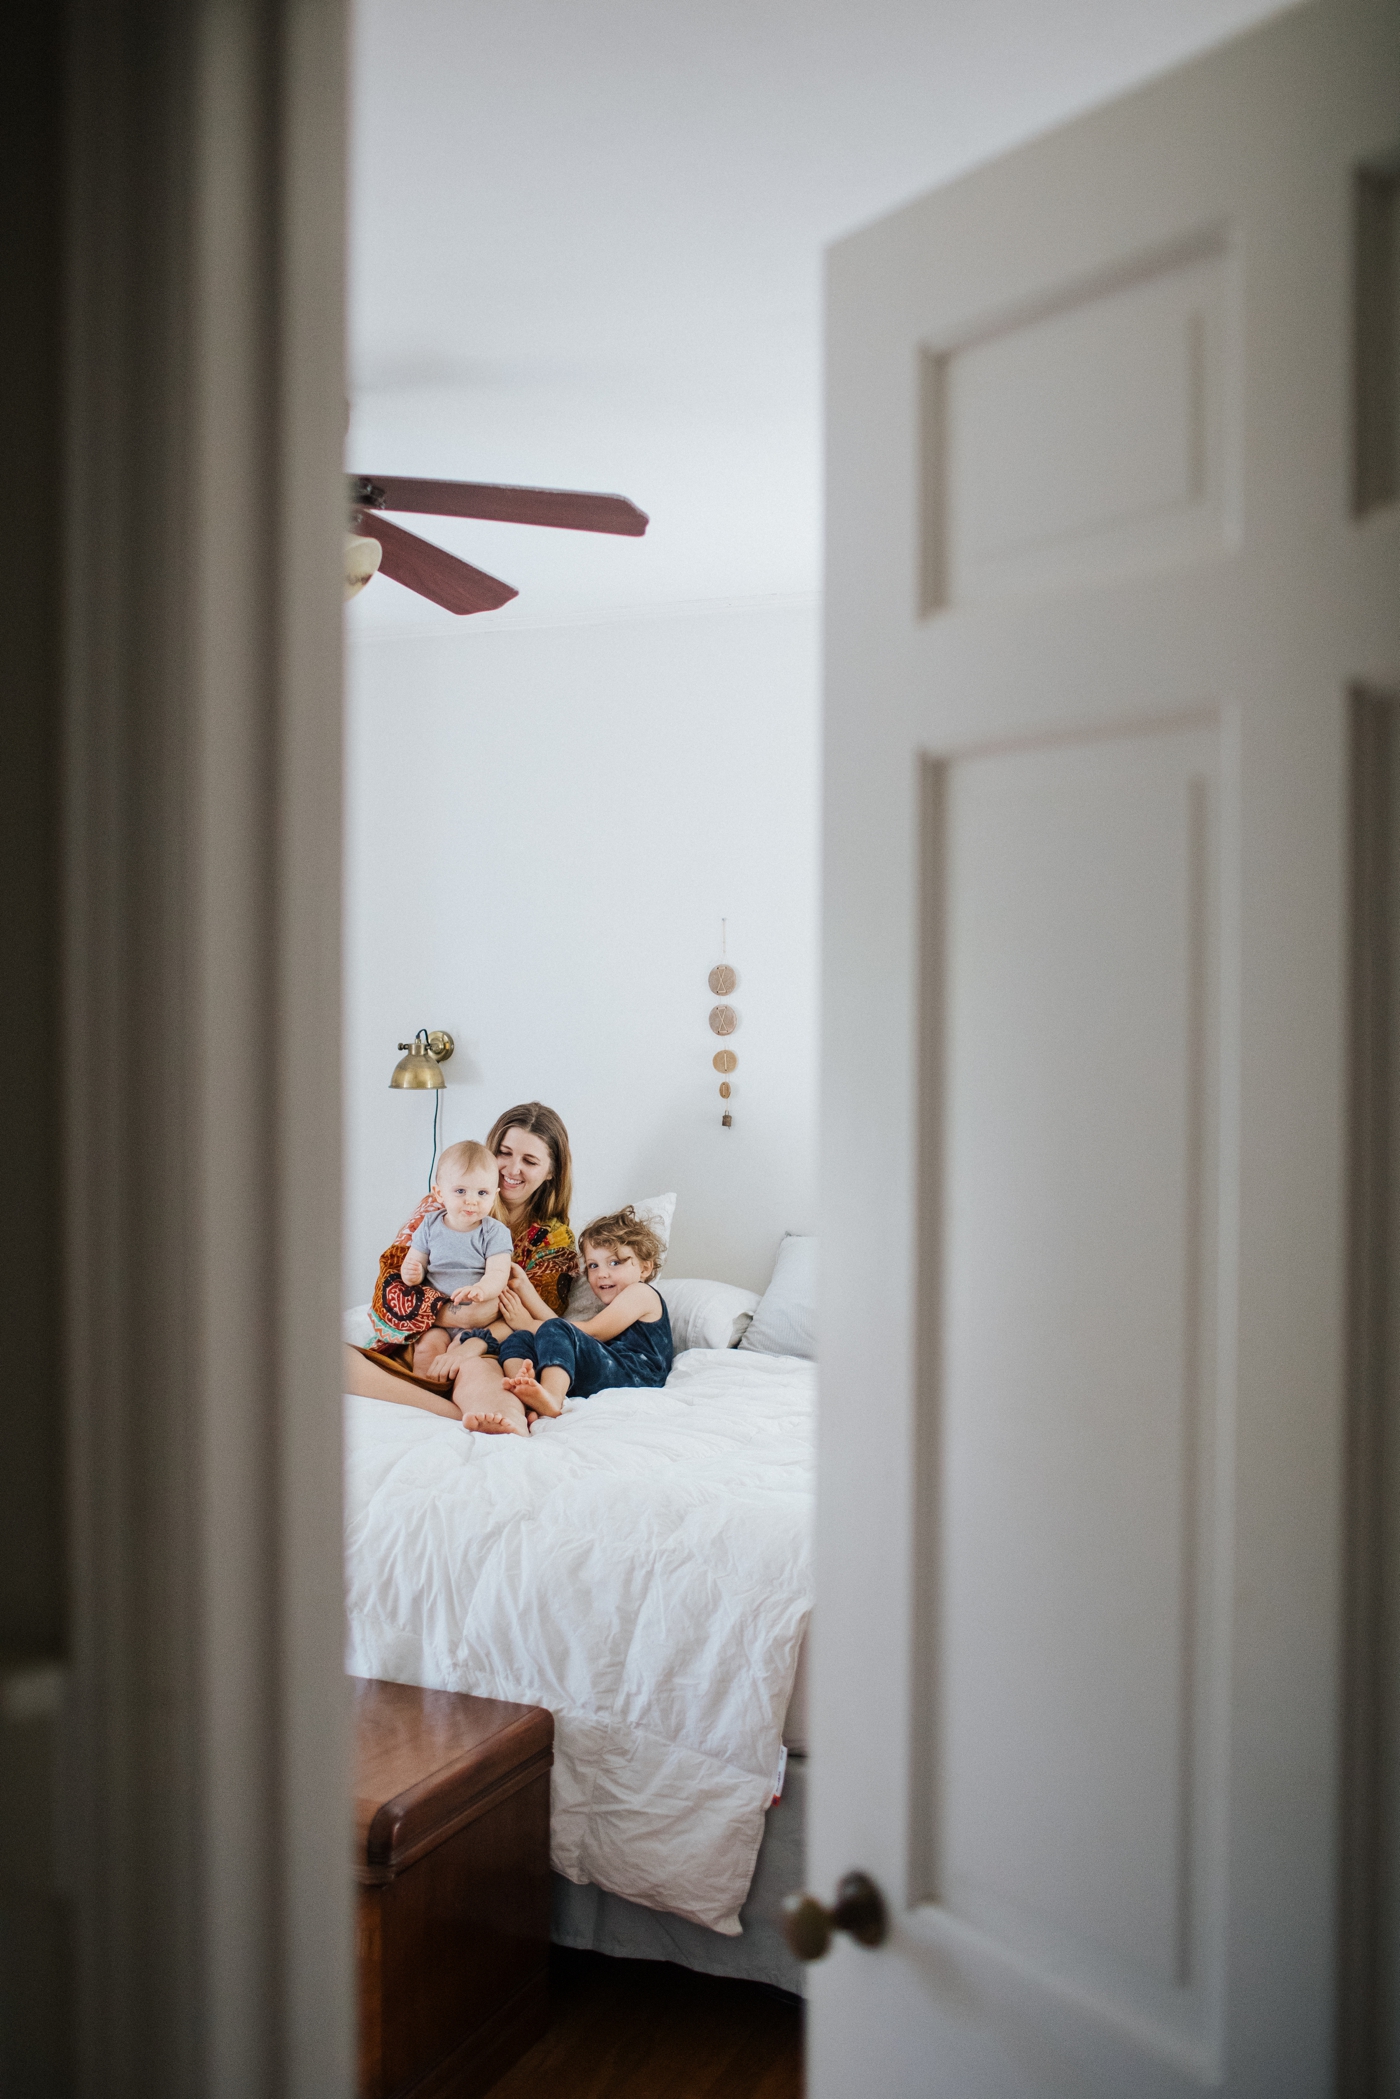 The Duthu Family - At Home Lifestyle Family Session in Savannah